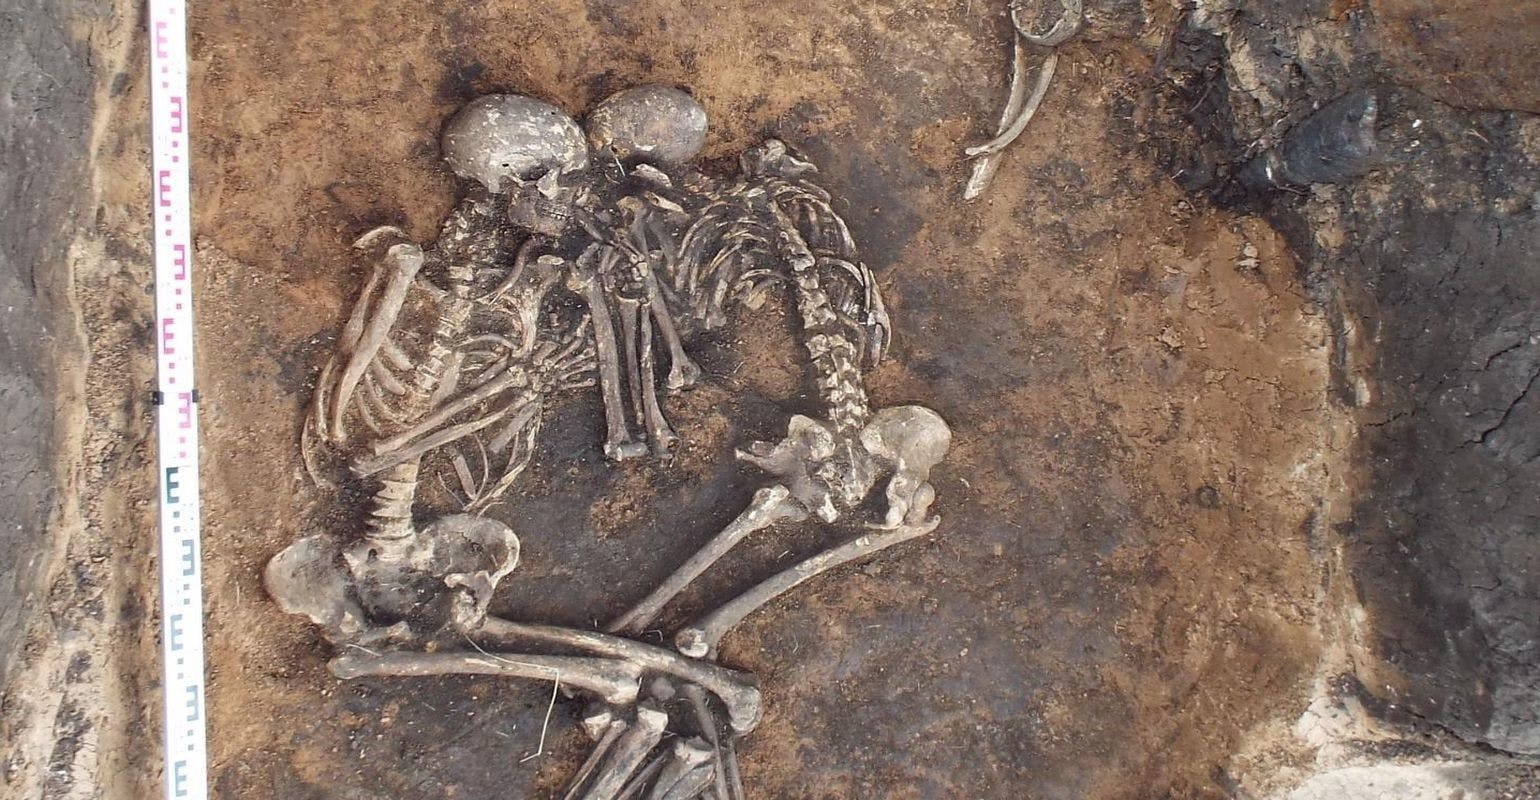 Oldest Bubonic Plague Genome is Decoded